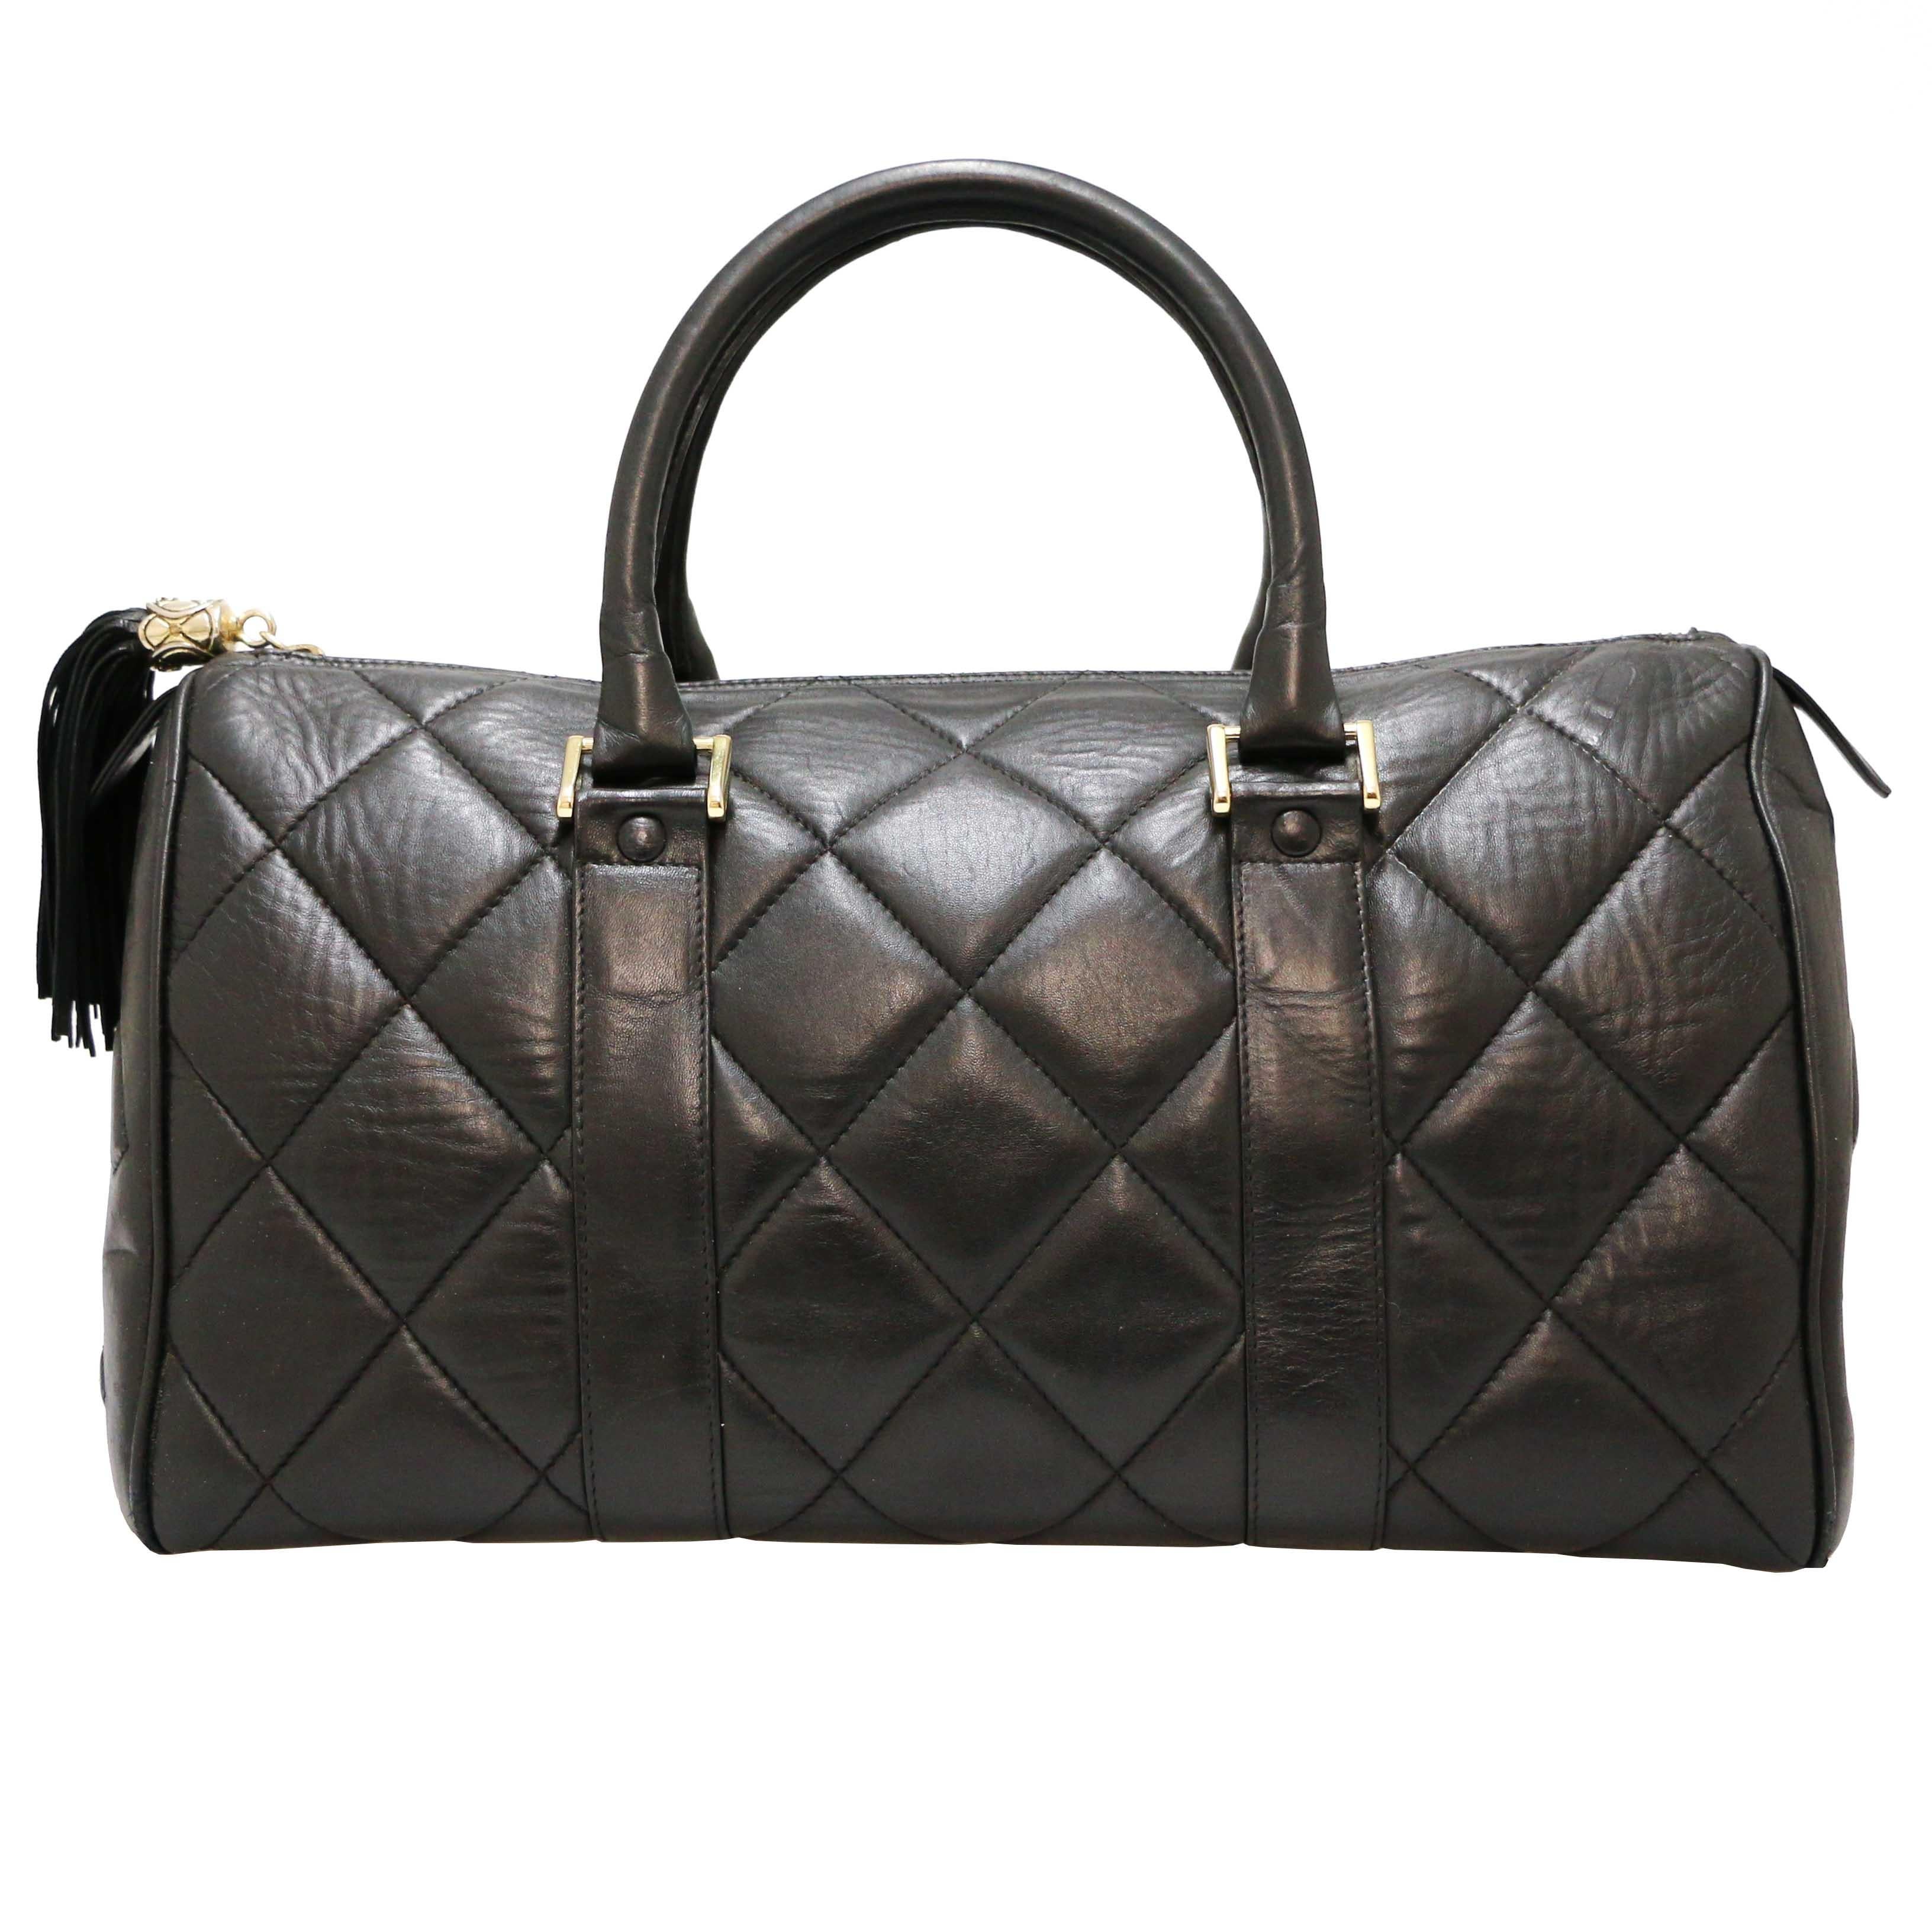 Wonderful tote bag from Chanel in quilted black lamb skin

Condition: very good
Made in France
Collection: tote bags
Genre: unisex
Material: quilted leather
Inside: maroon leather
Color: black
dimensions: 40 x 20 x 18 cm
Hologram: no
Year: